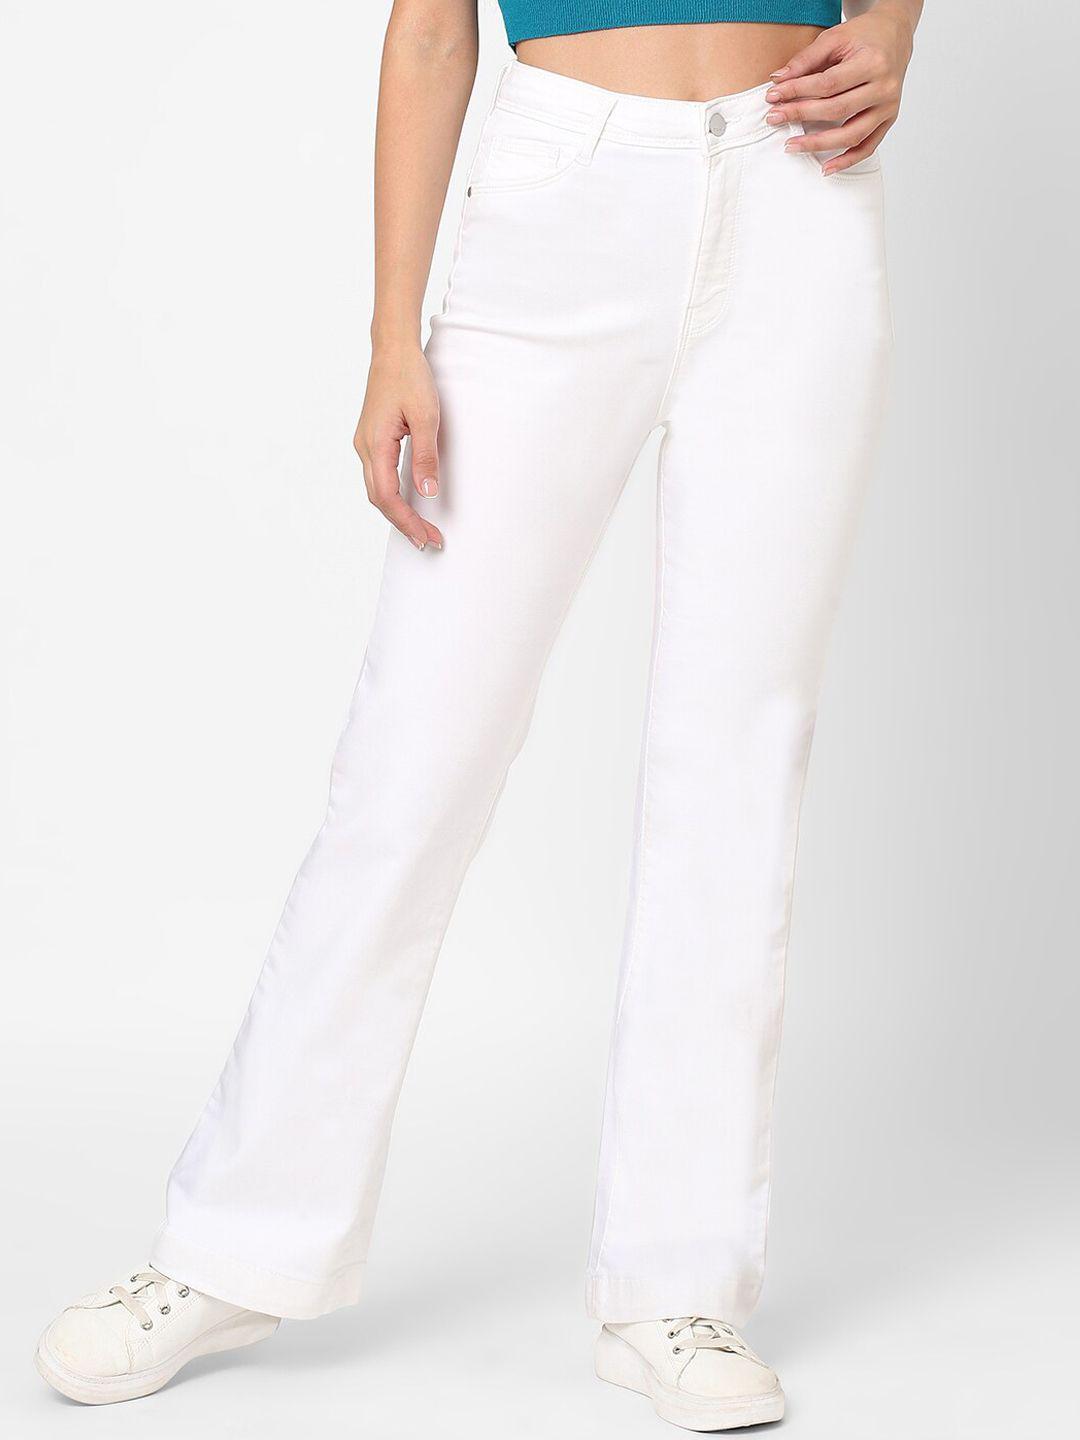 kraus-jeans-women-white-flared-high-rise-stretchable-jeans